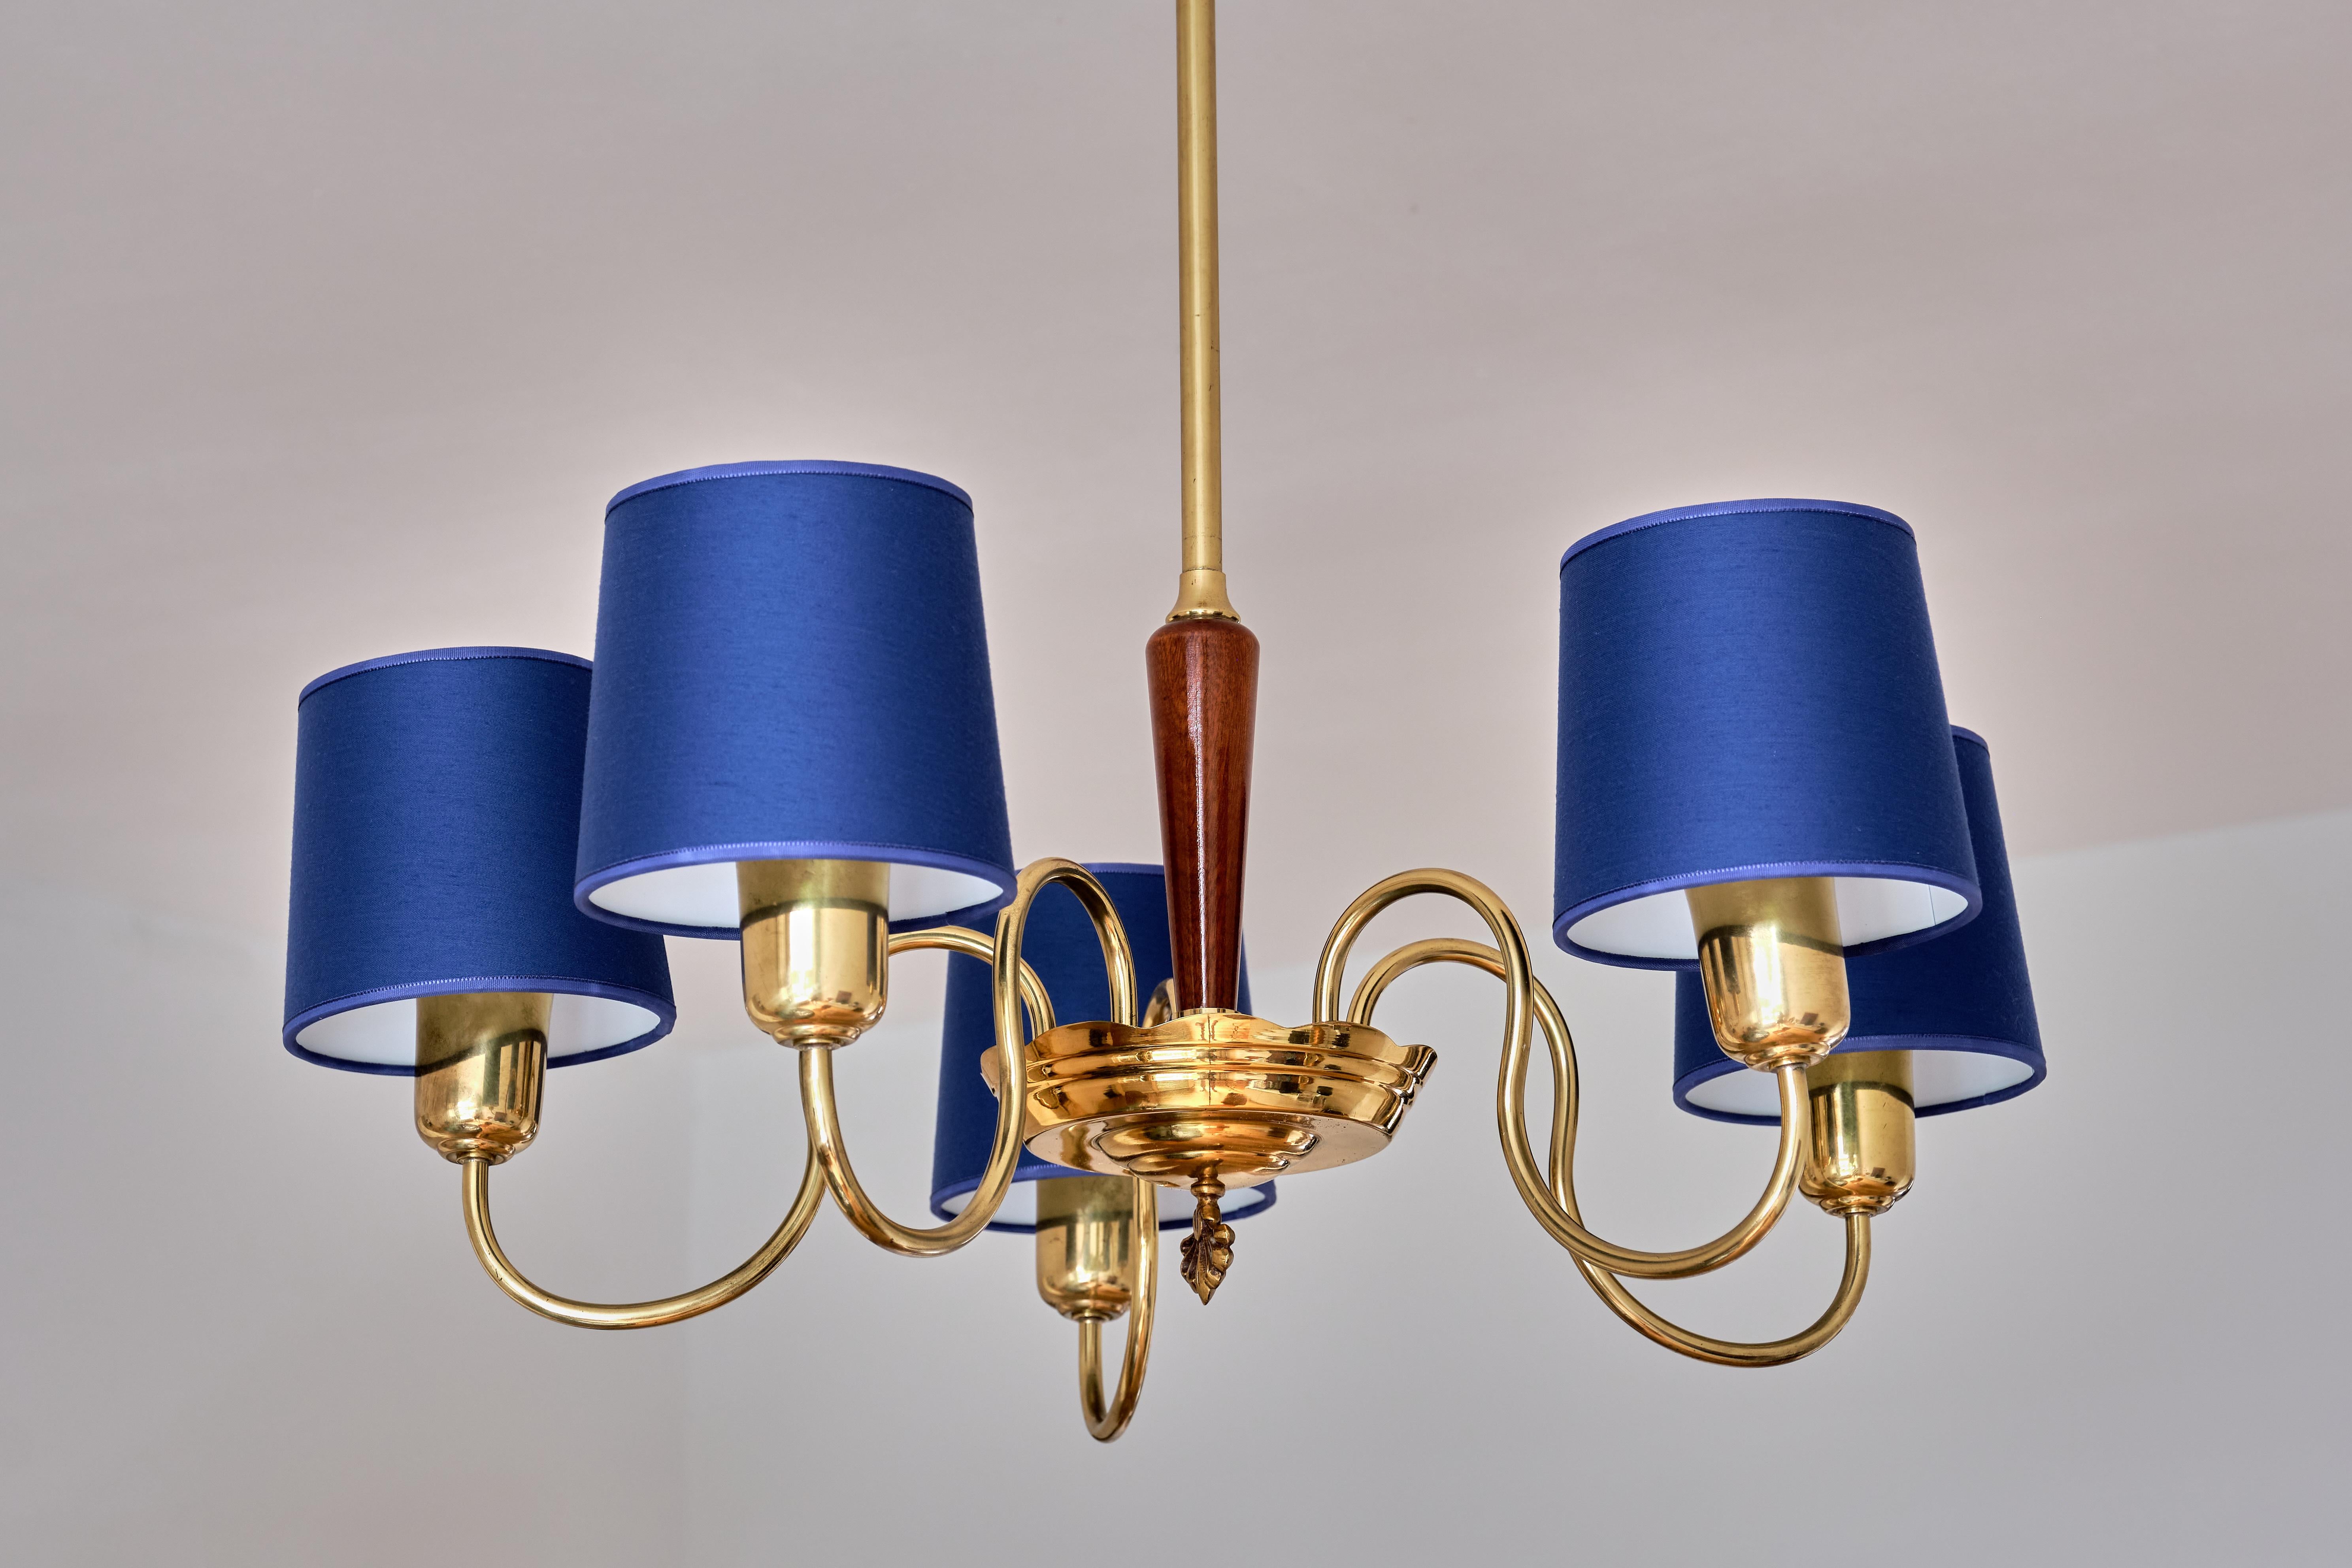 This elegant brass chandelier was produced by ASEA Belysning in Sweden in the 1940s. The brass stem leading to a wooden column in lacquered elm and a brass receiver bow with a crown finial detail. The five arms and tubular lamp holders are in brass